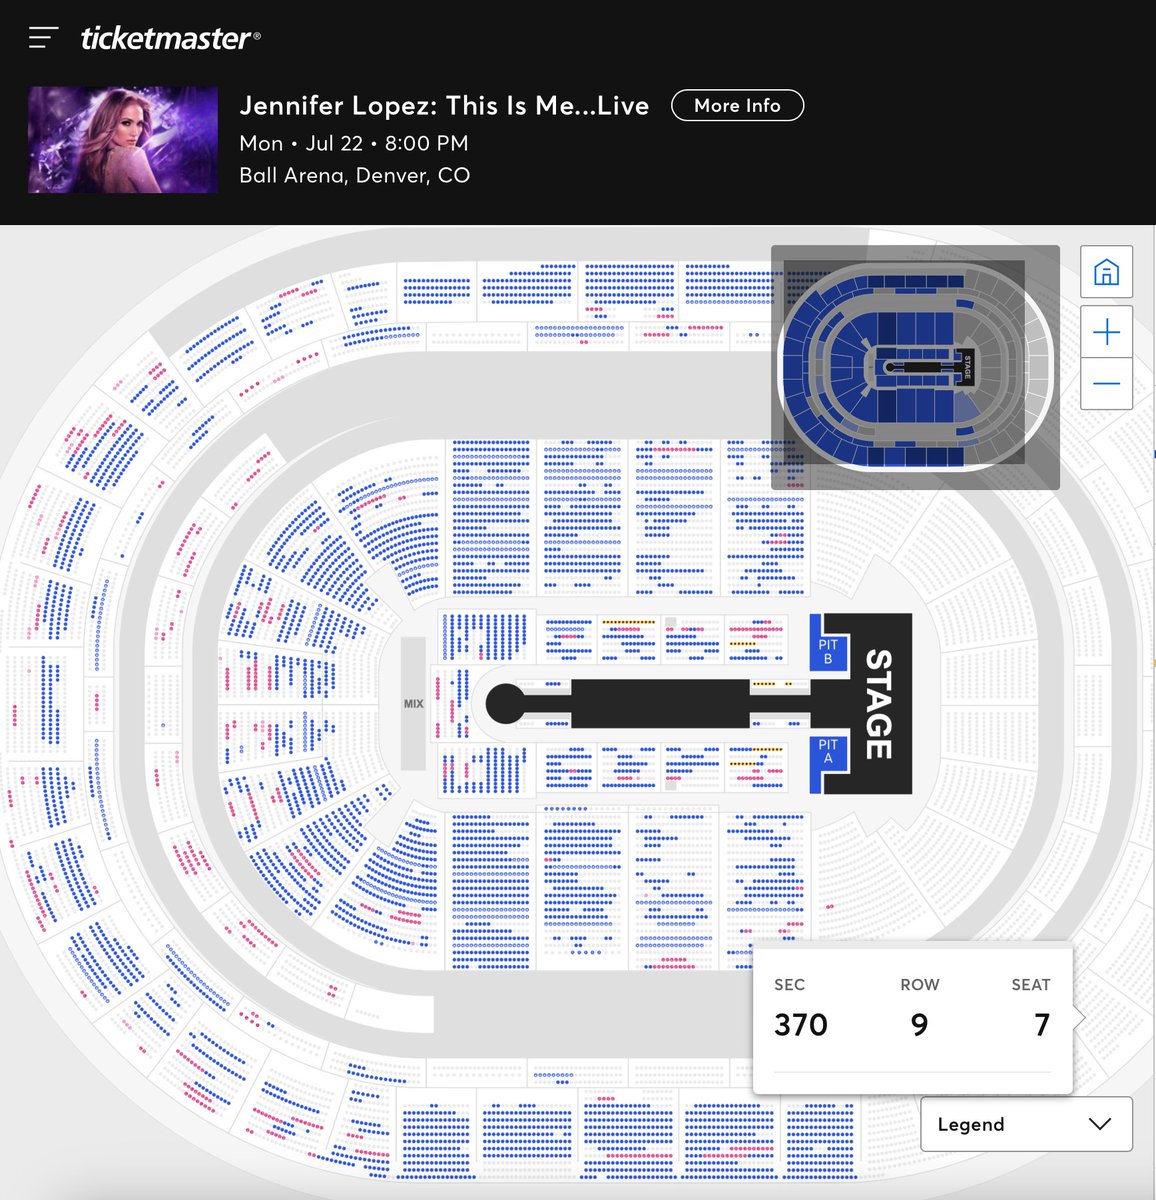 NEW: #JenniferLopez's 7/22 #BallArena show is now canceled, along with her entire tour. Sales were so bad @Variety used them as its sad seating-chart example. Refunds will be automatic. Same thing JUST happened to #BlackKeys' Denver date, and nat'l tour variety.com/2024/music/new…